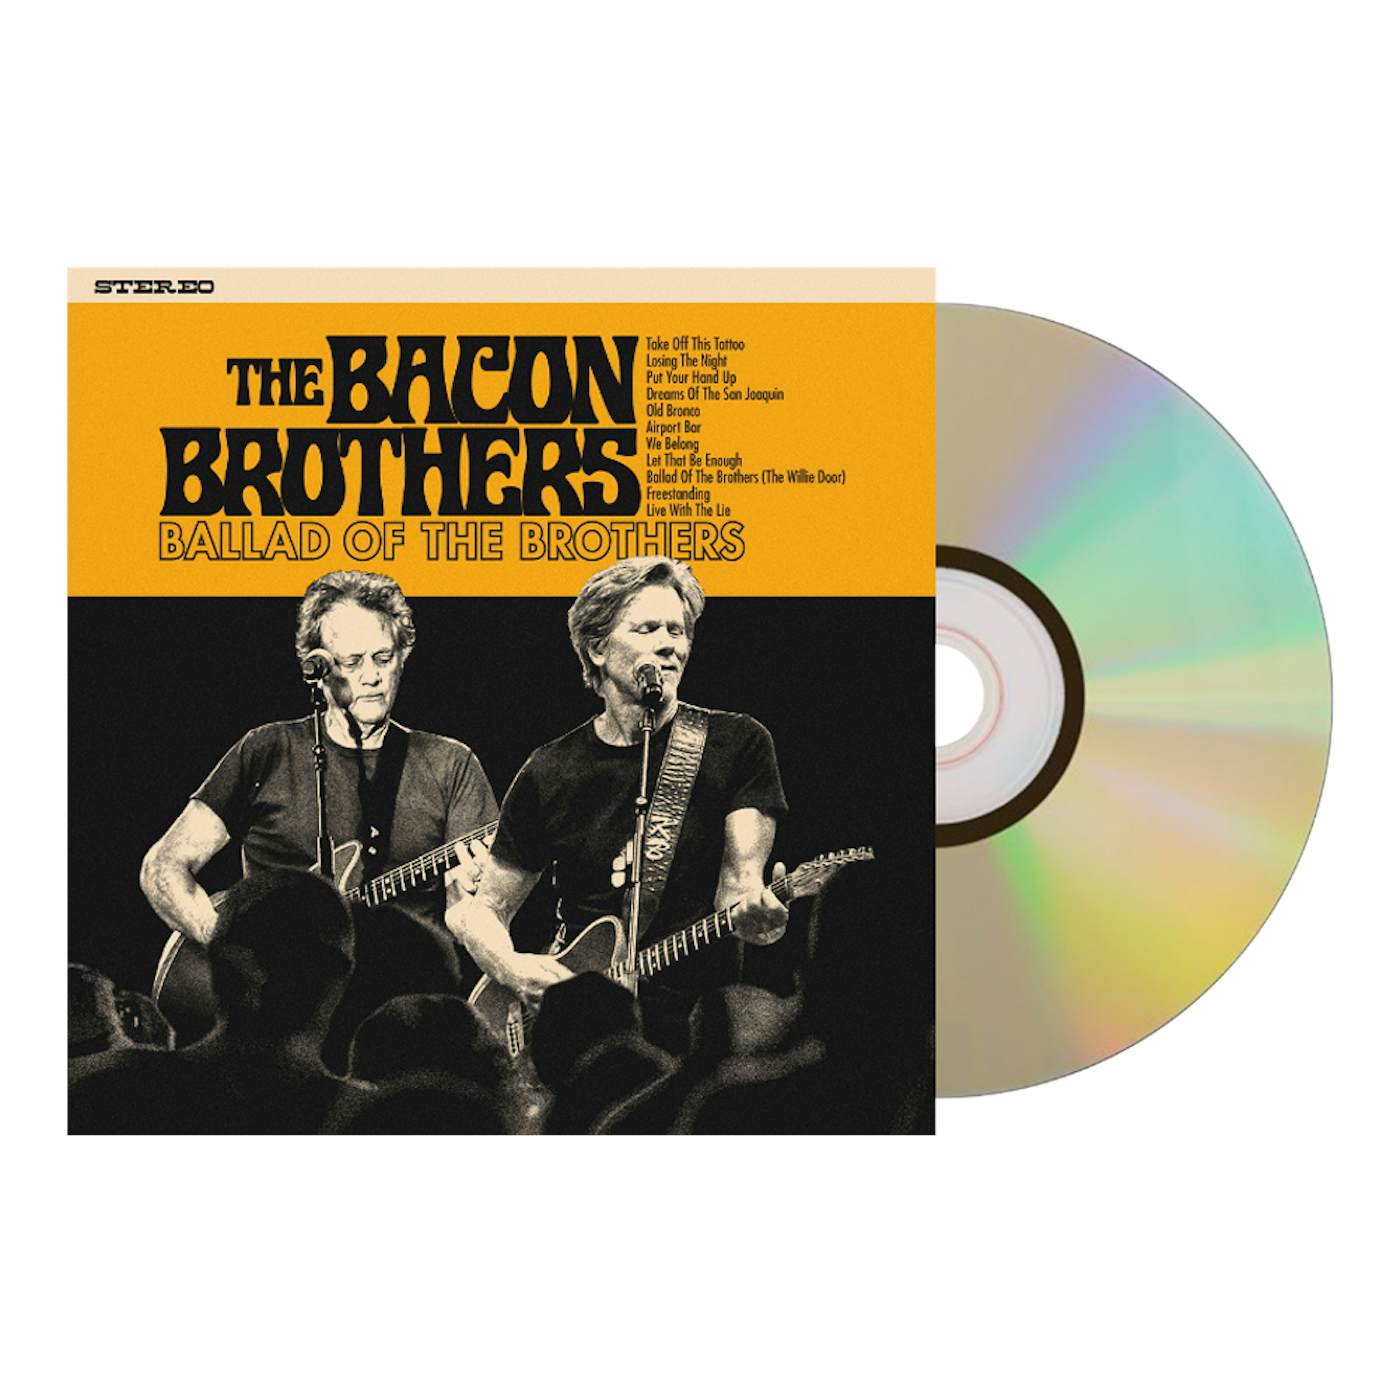 The Bacon Brothers Ballad Of The Brothers CD